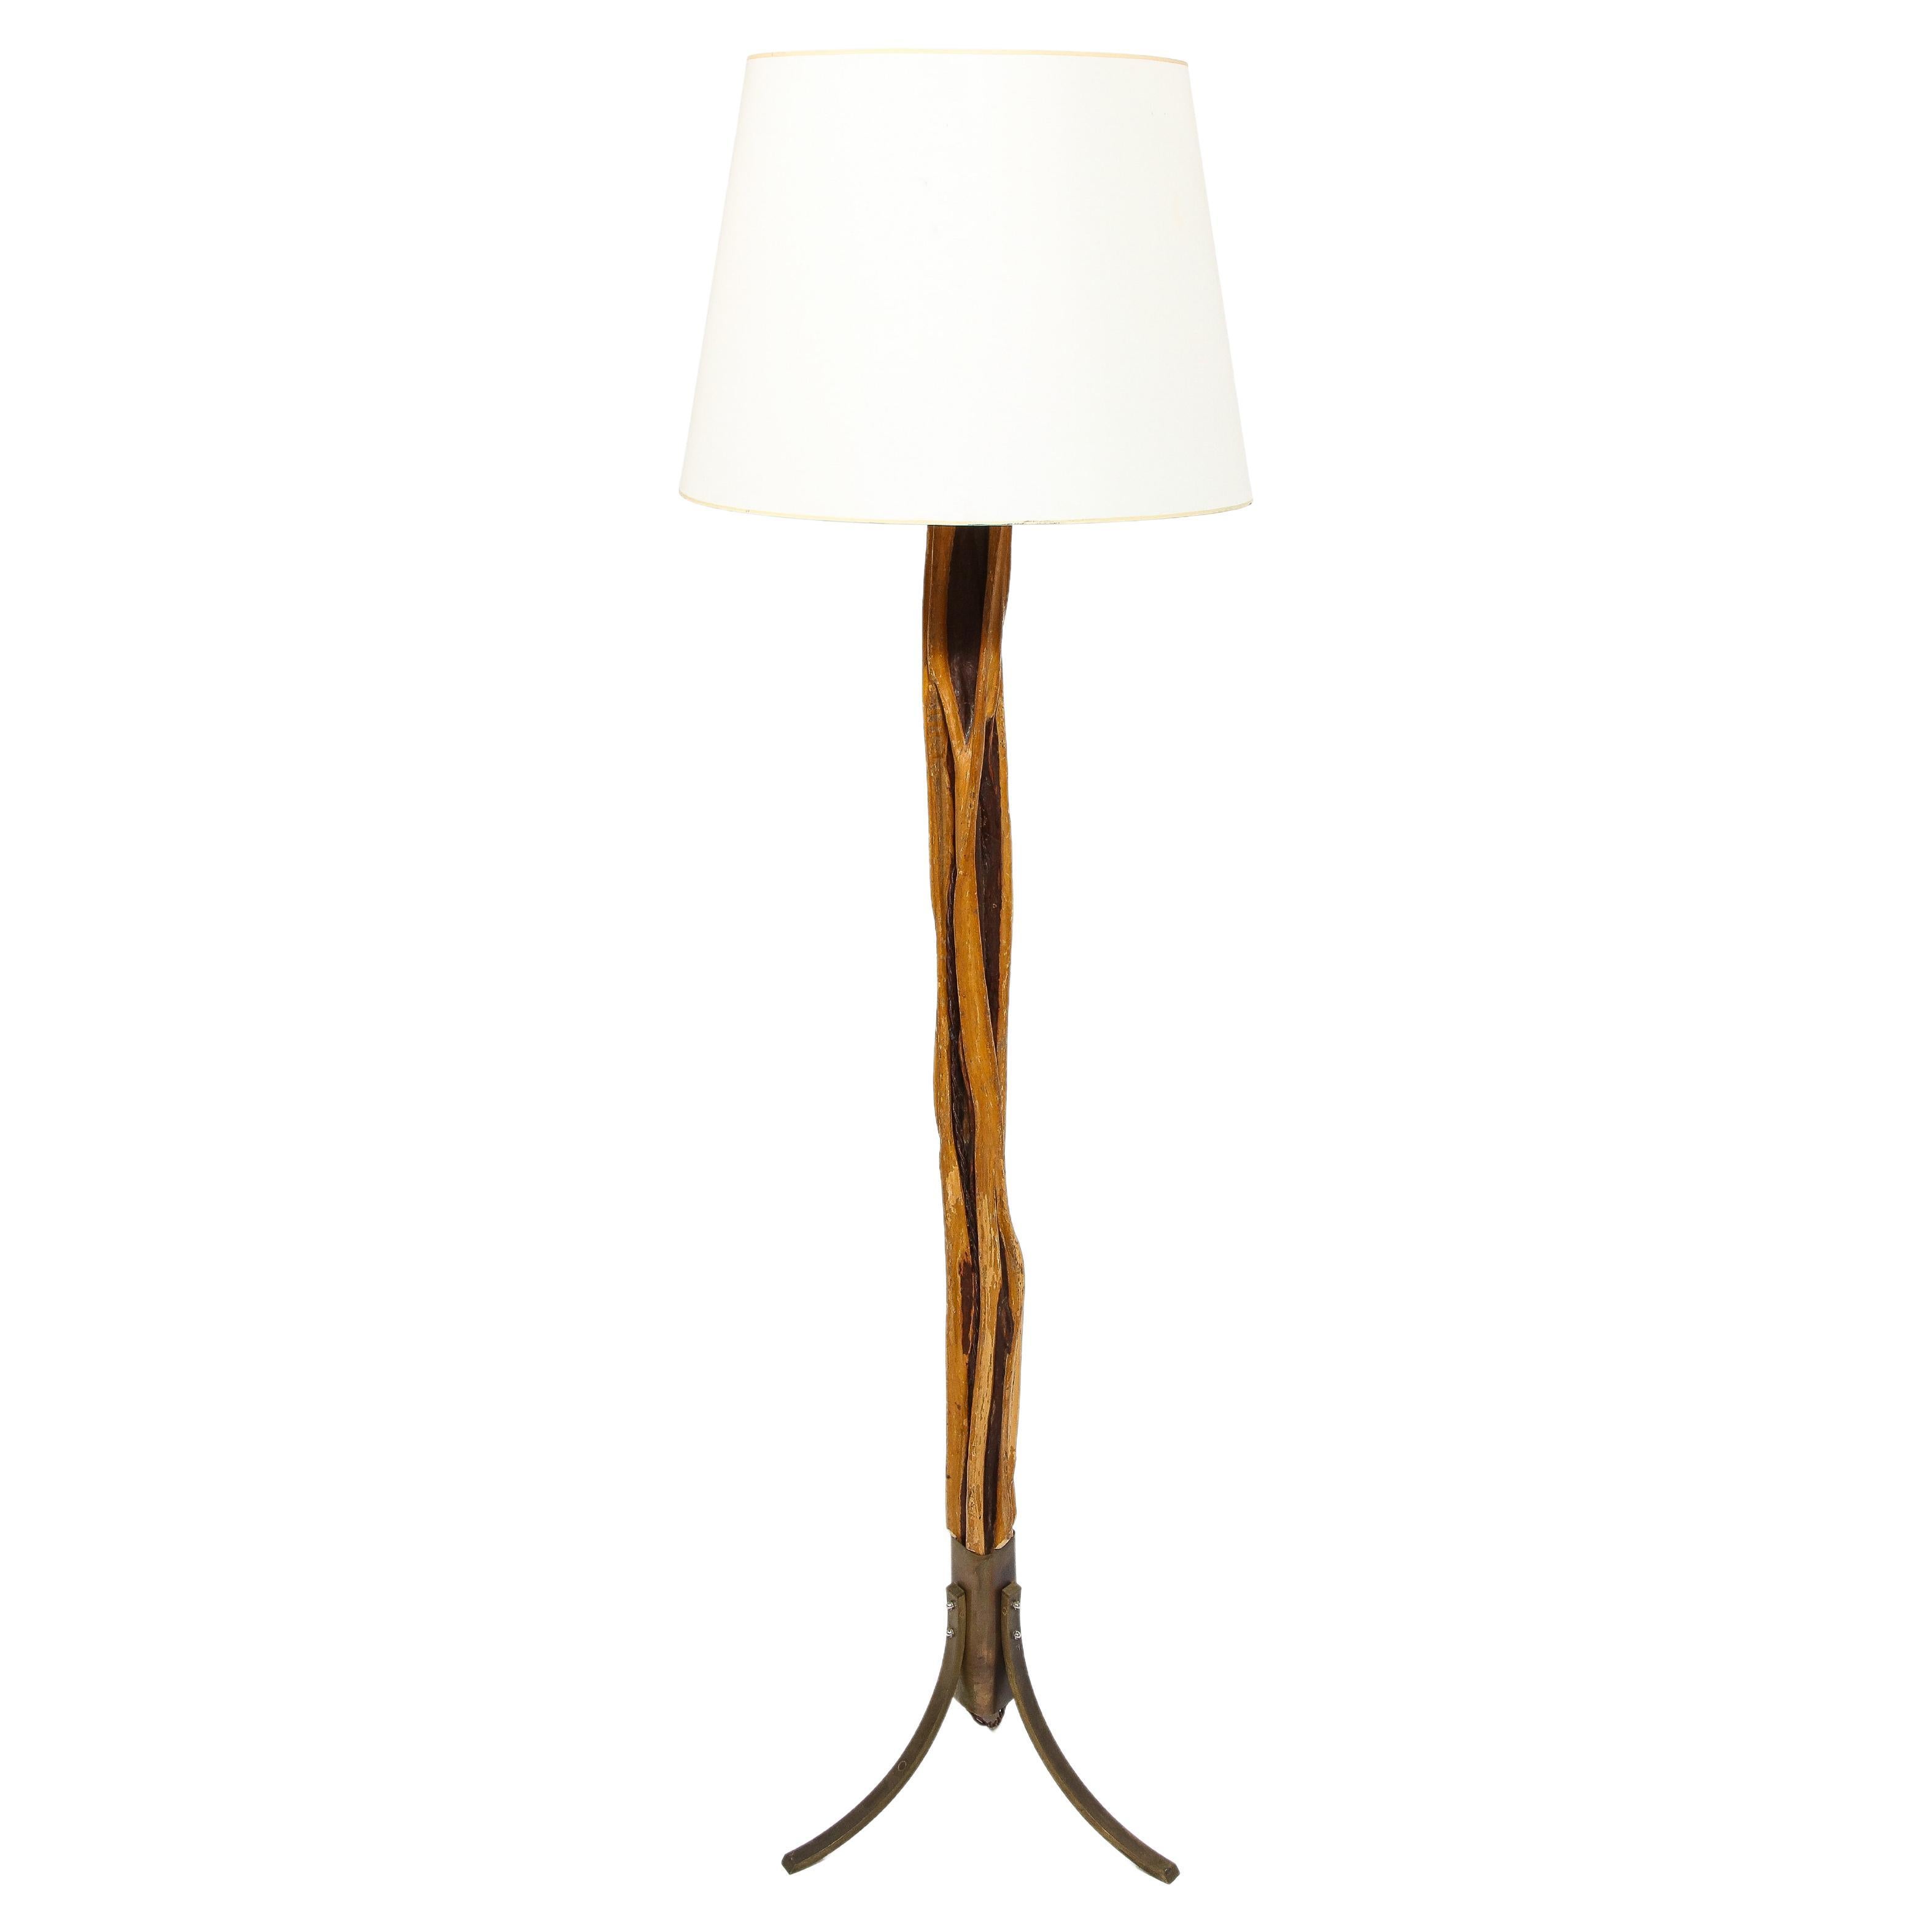 Natural Wood and Brass Floor Lamp, France 1960's For Sale